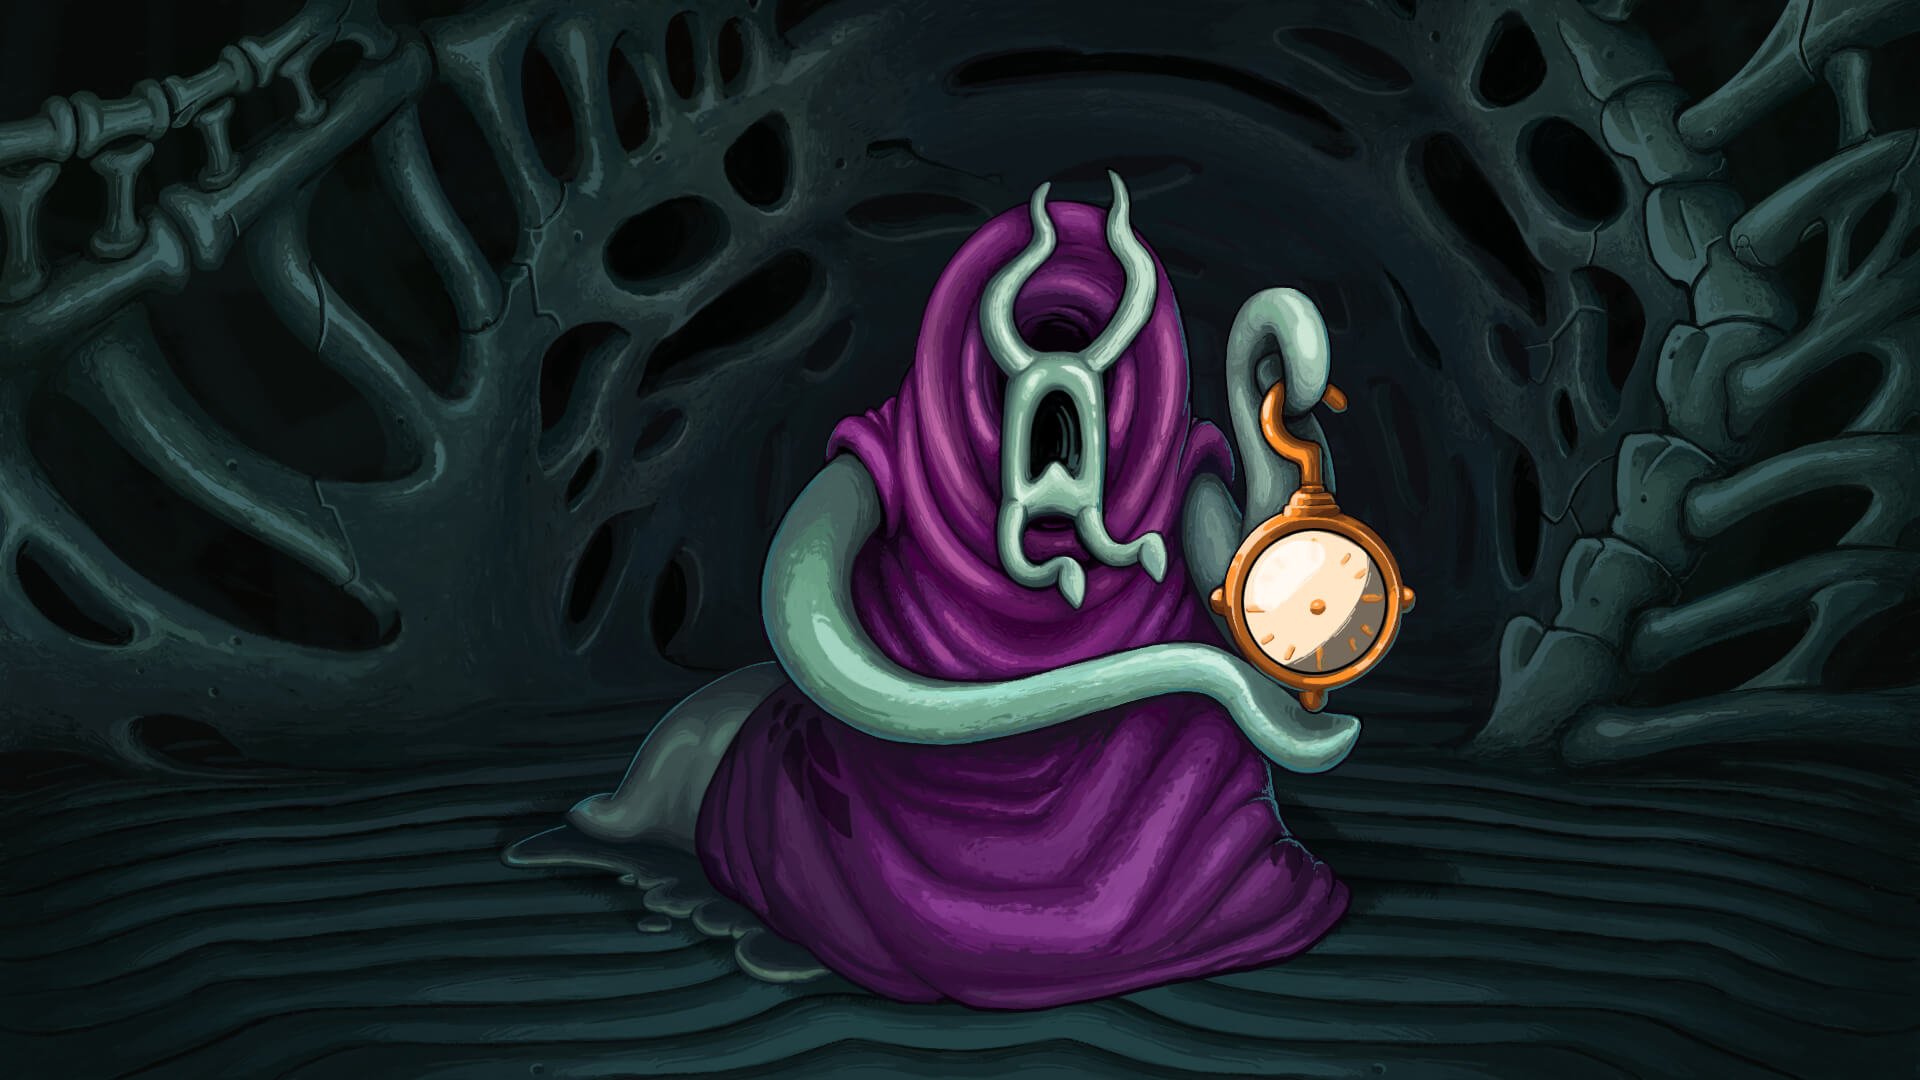 HD desktop wallpaper featuring Slay the Spire game character with mystical clock in eerie setting.